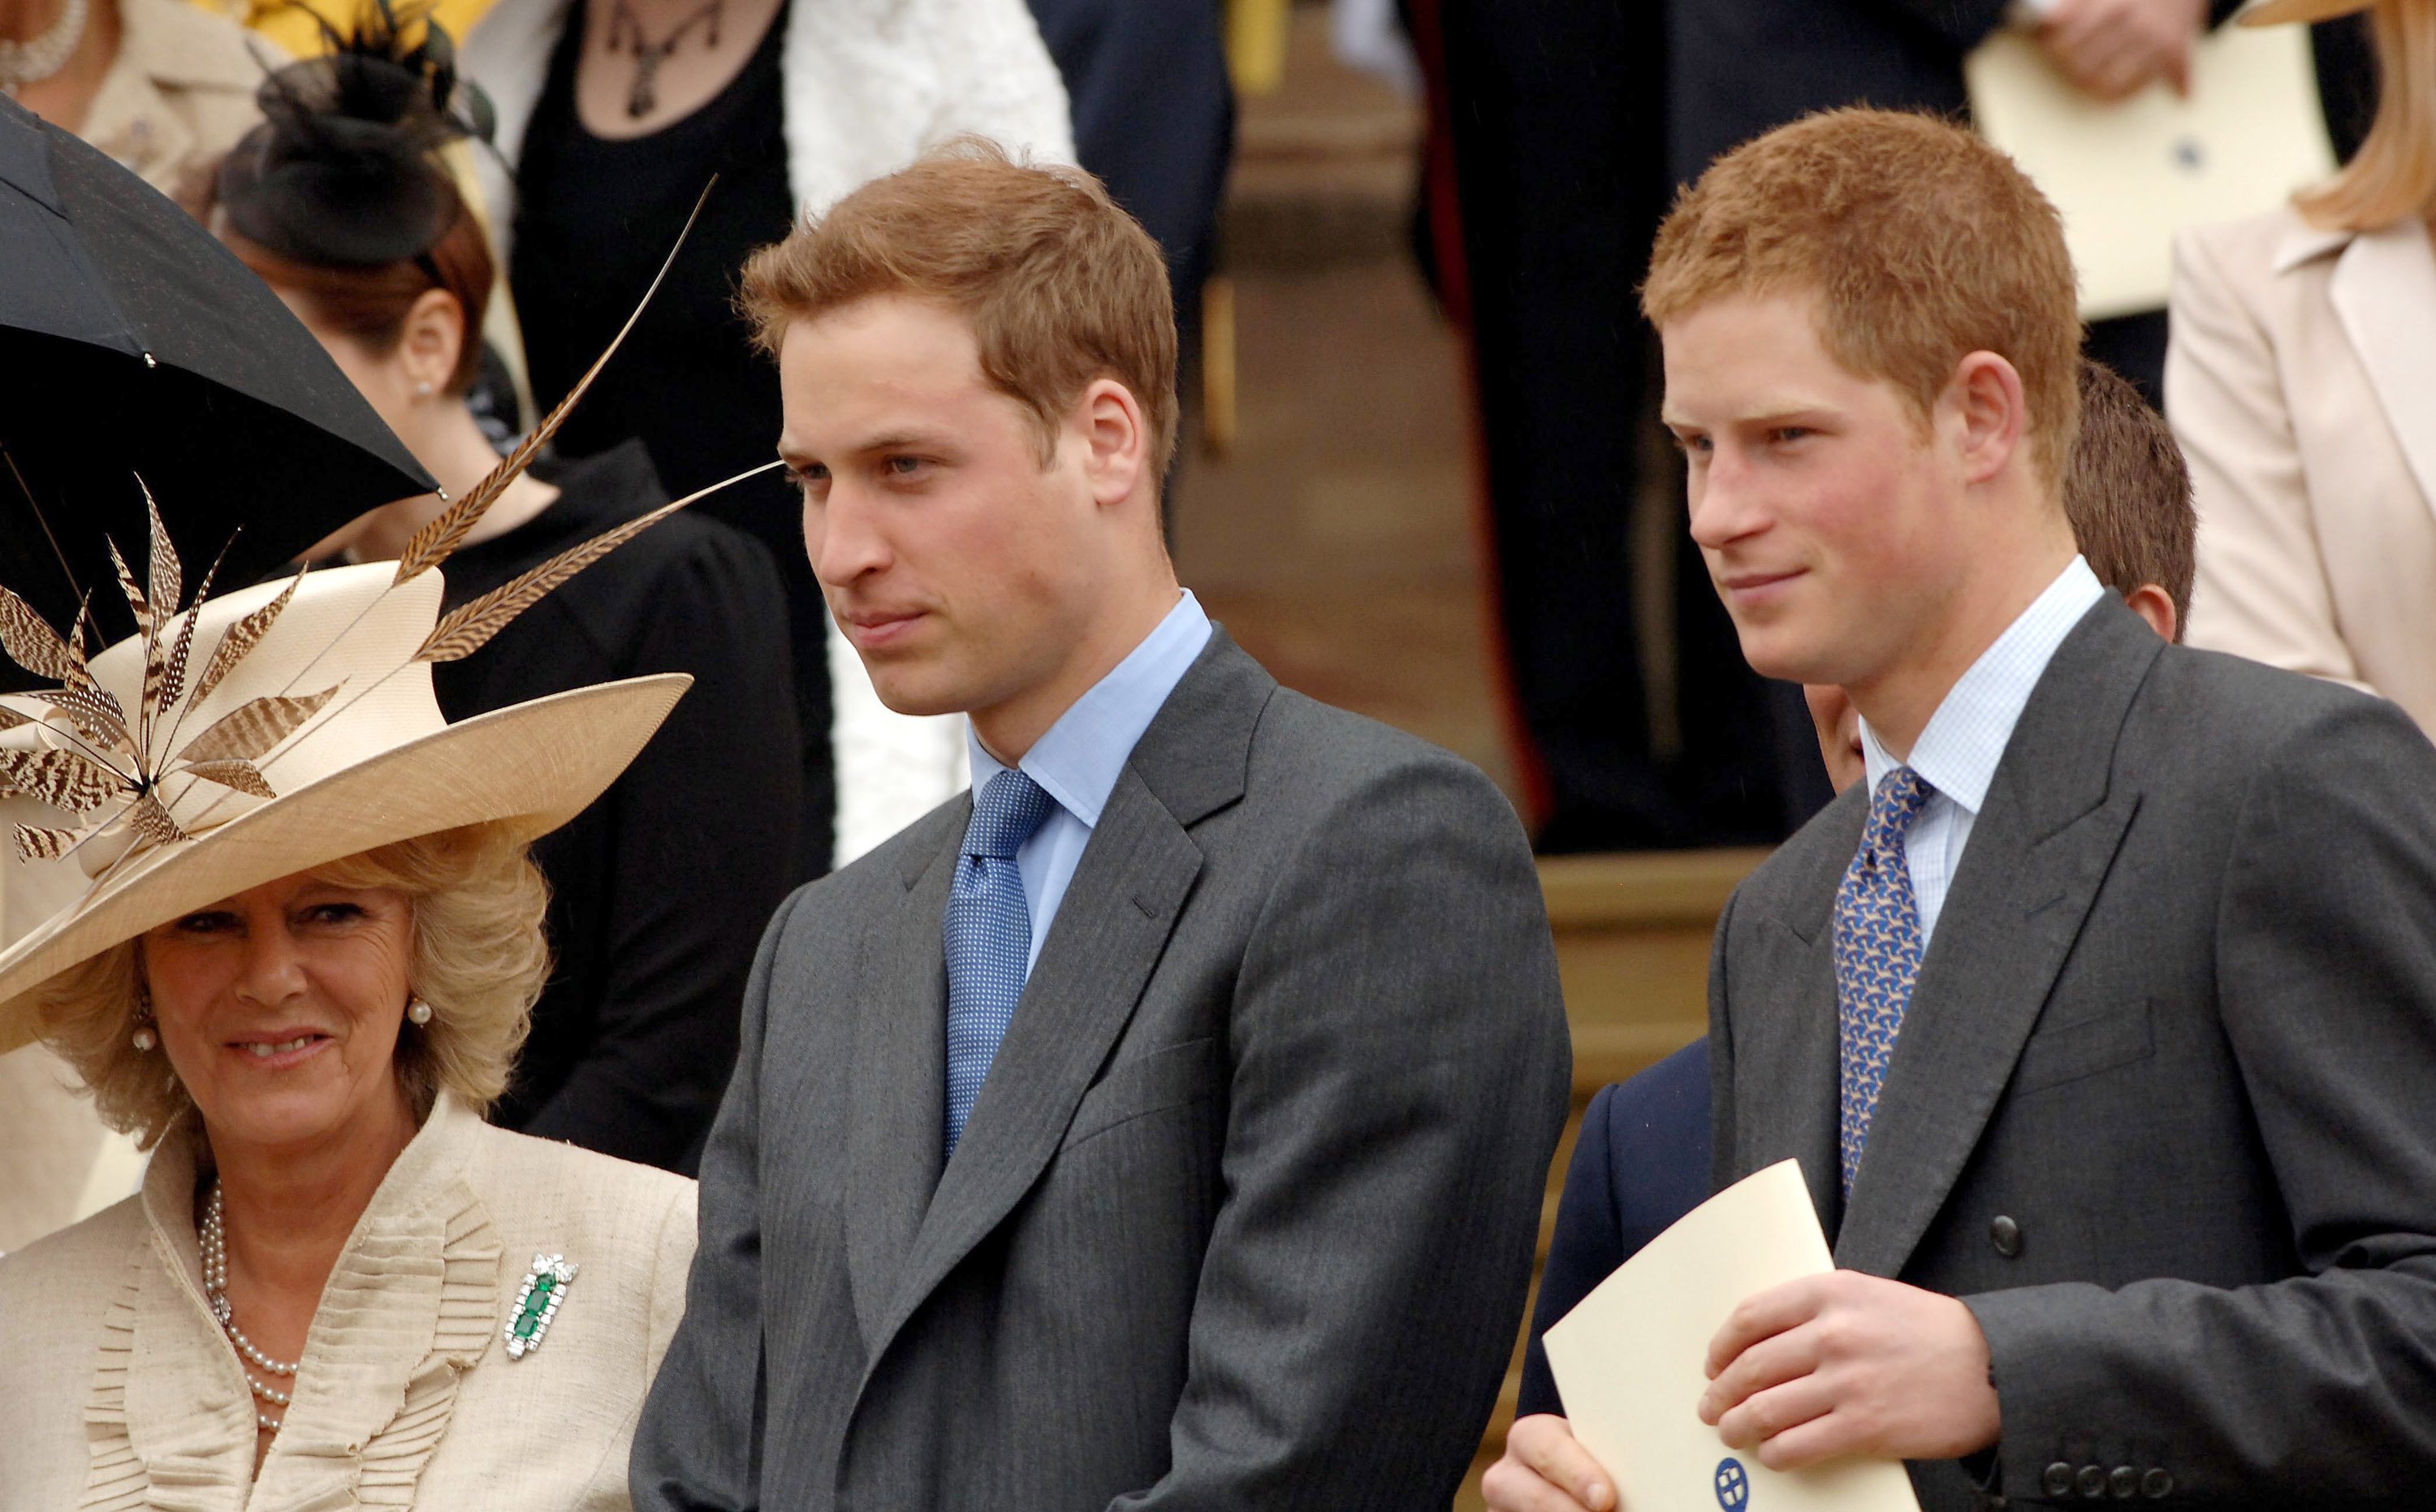 Camilla Parker-Bowles, Duchess of Cornwall, Prince William, and Prince Harry stand on the steps of St. George's Chapel, Windsor, following the Service of Thanksgiving for the Queen's 80th birthday on April 23, 2006 | Source: Getty Images